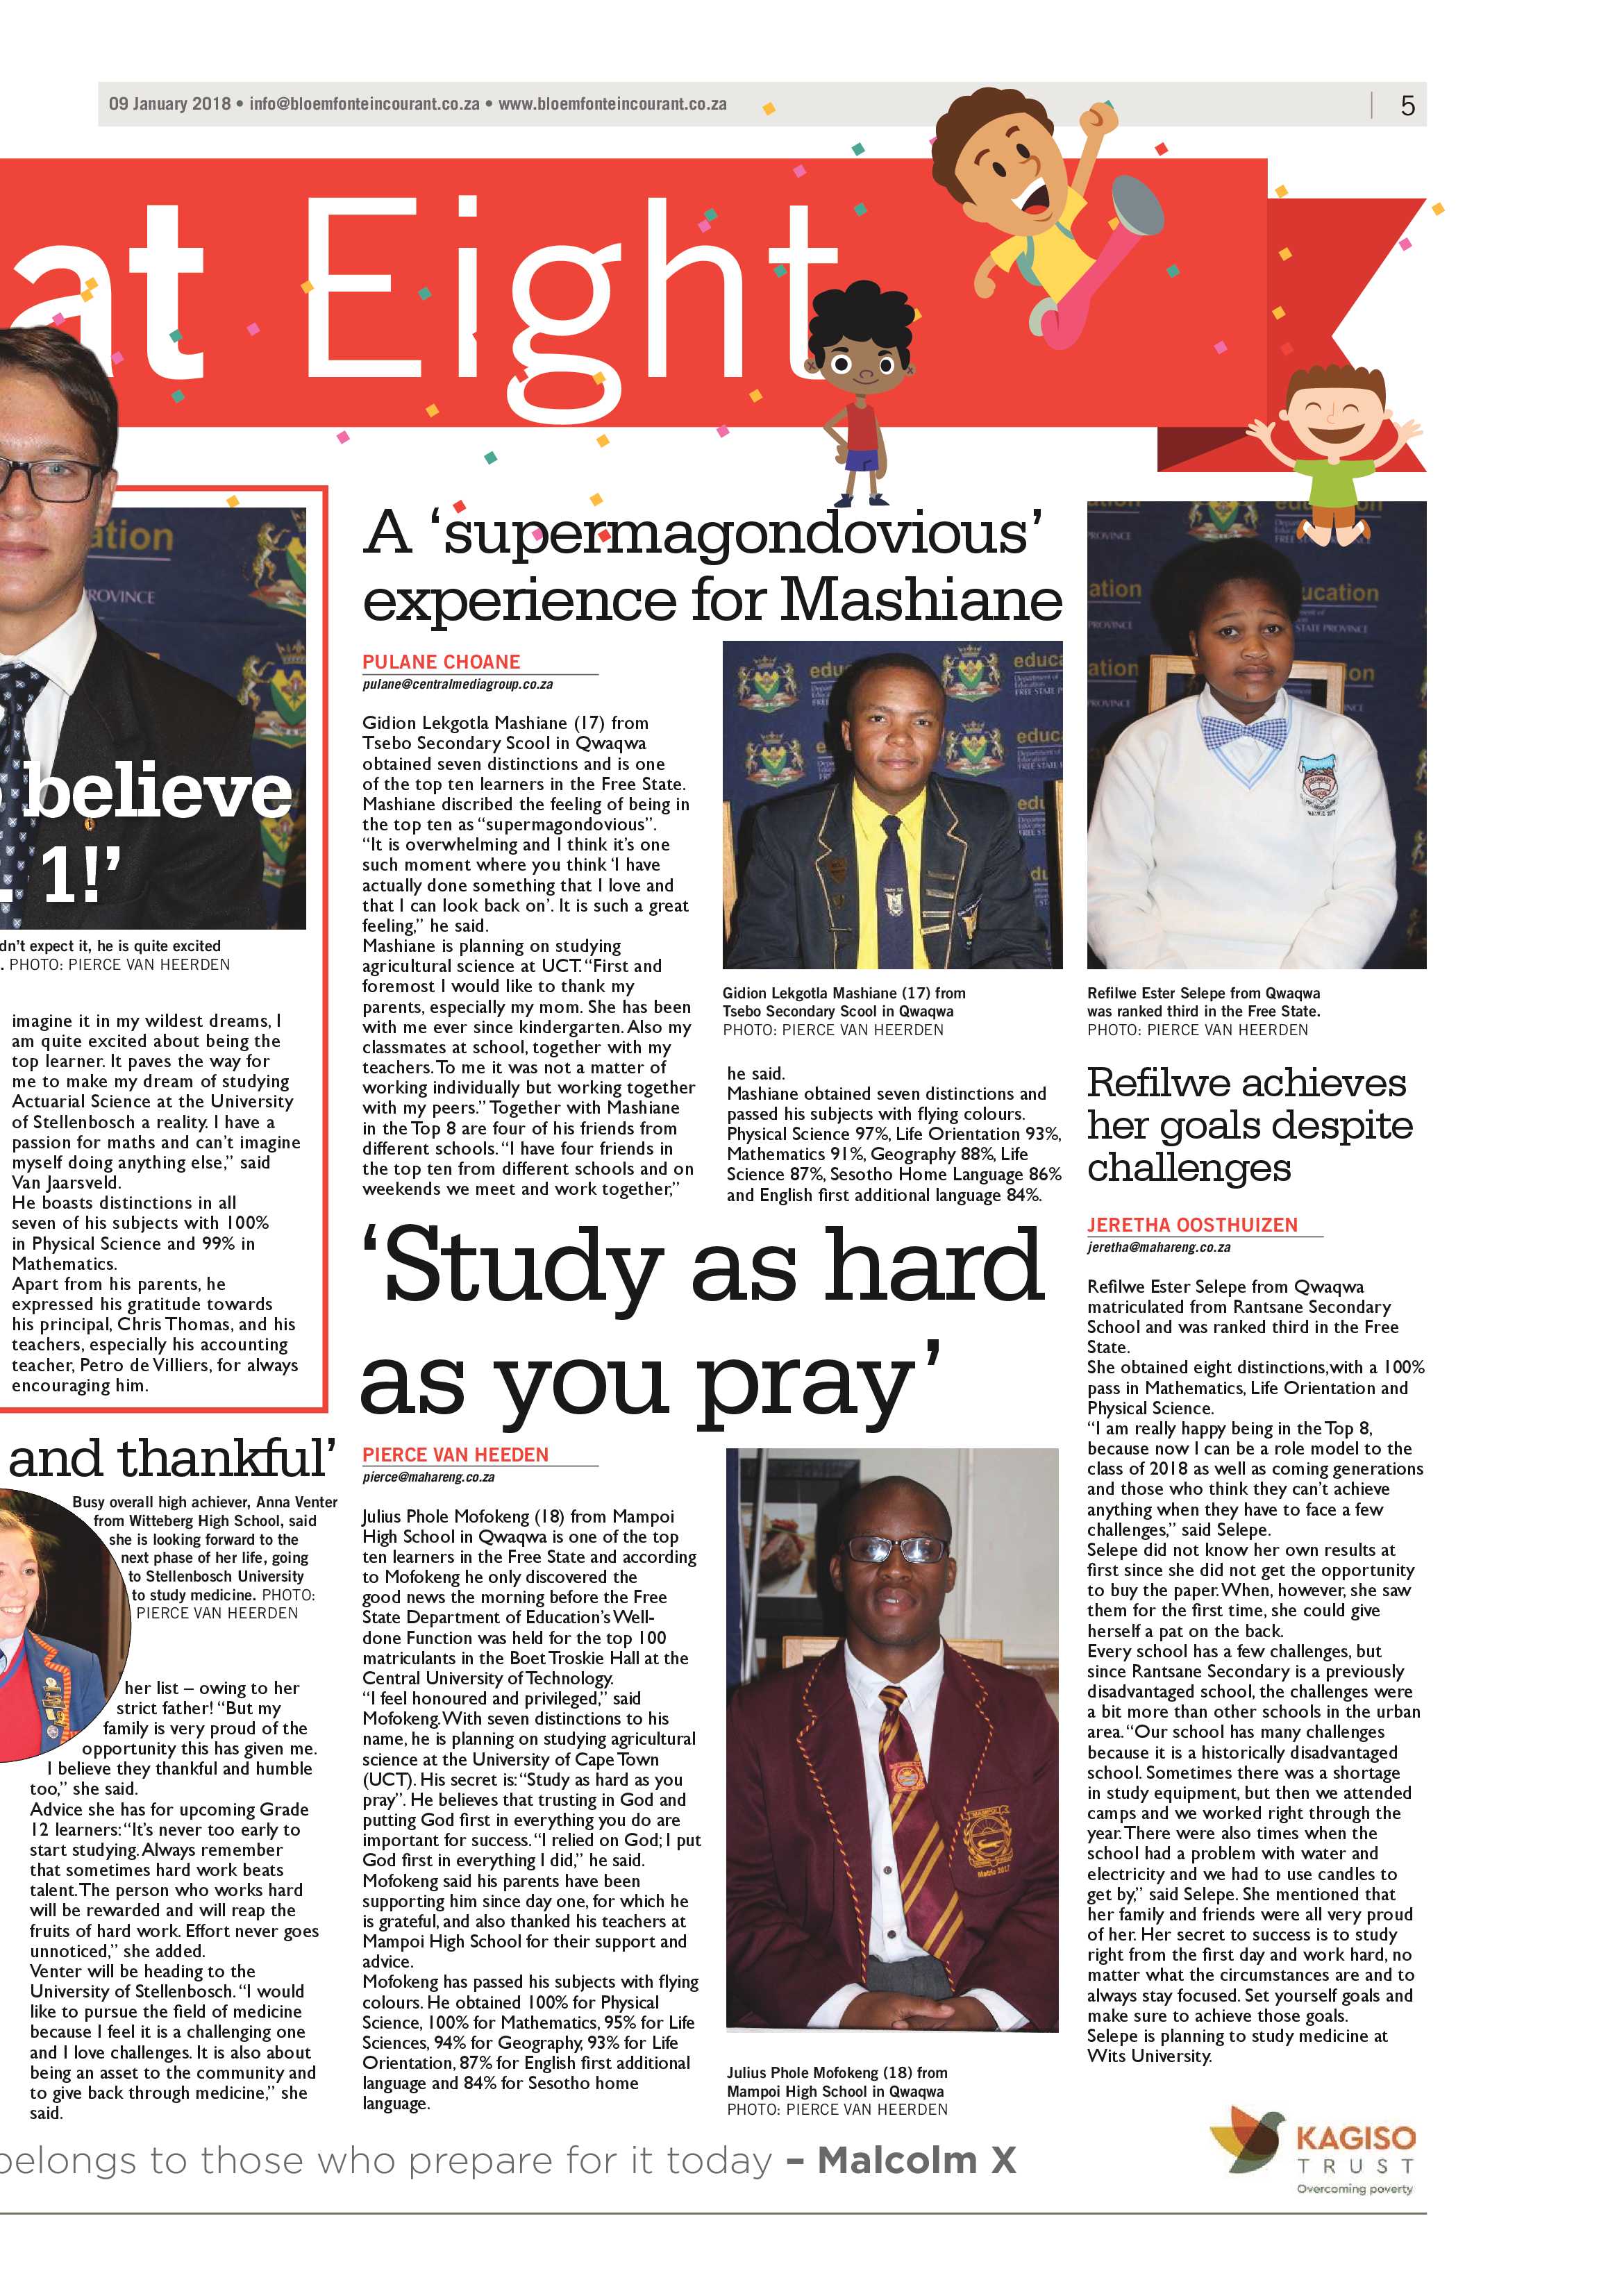 09-january-2018-bloemfontein-courant-best-achievers-epapers-page-5